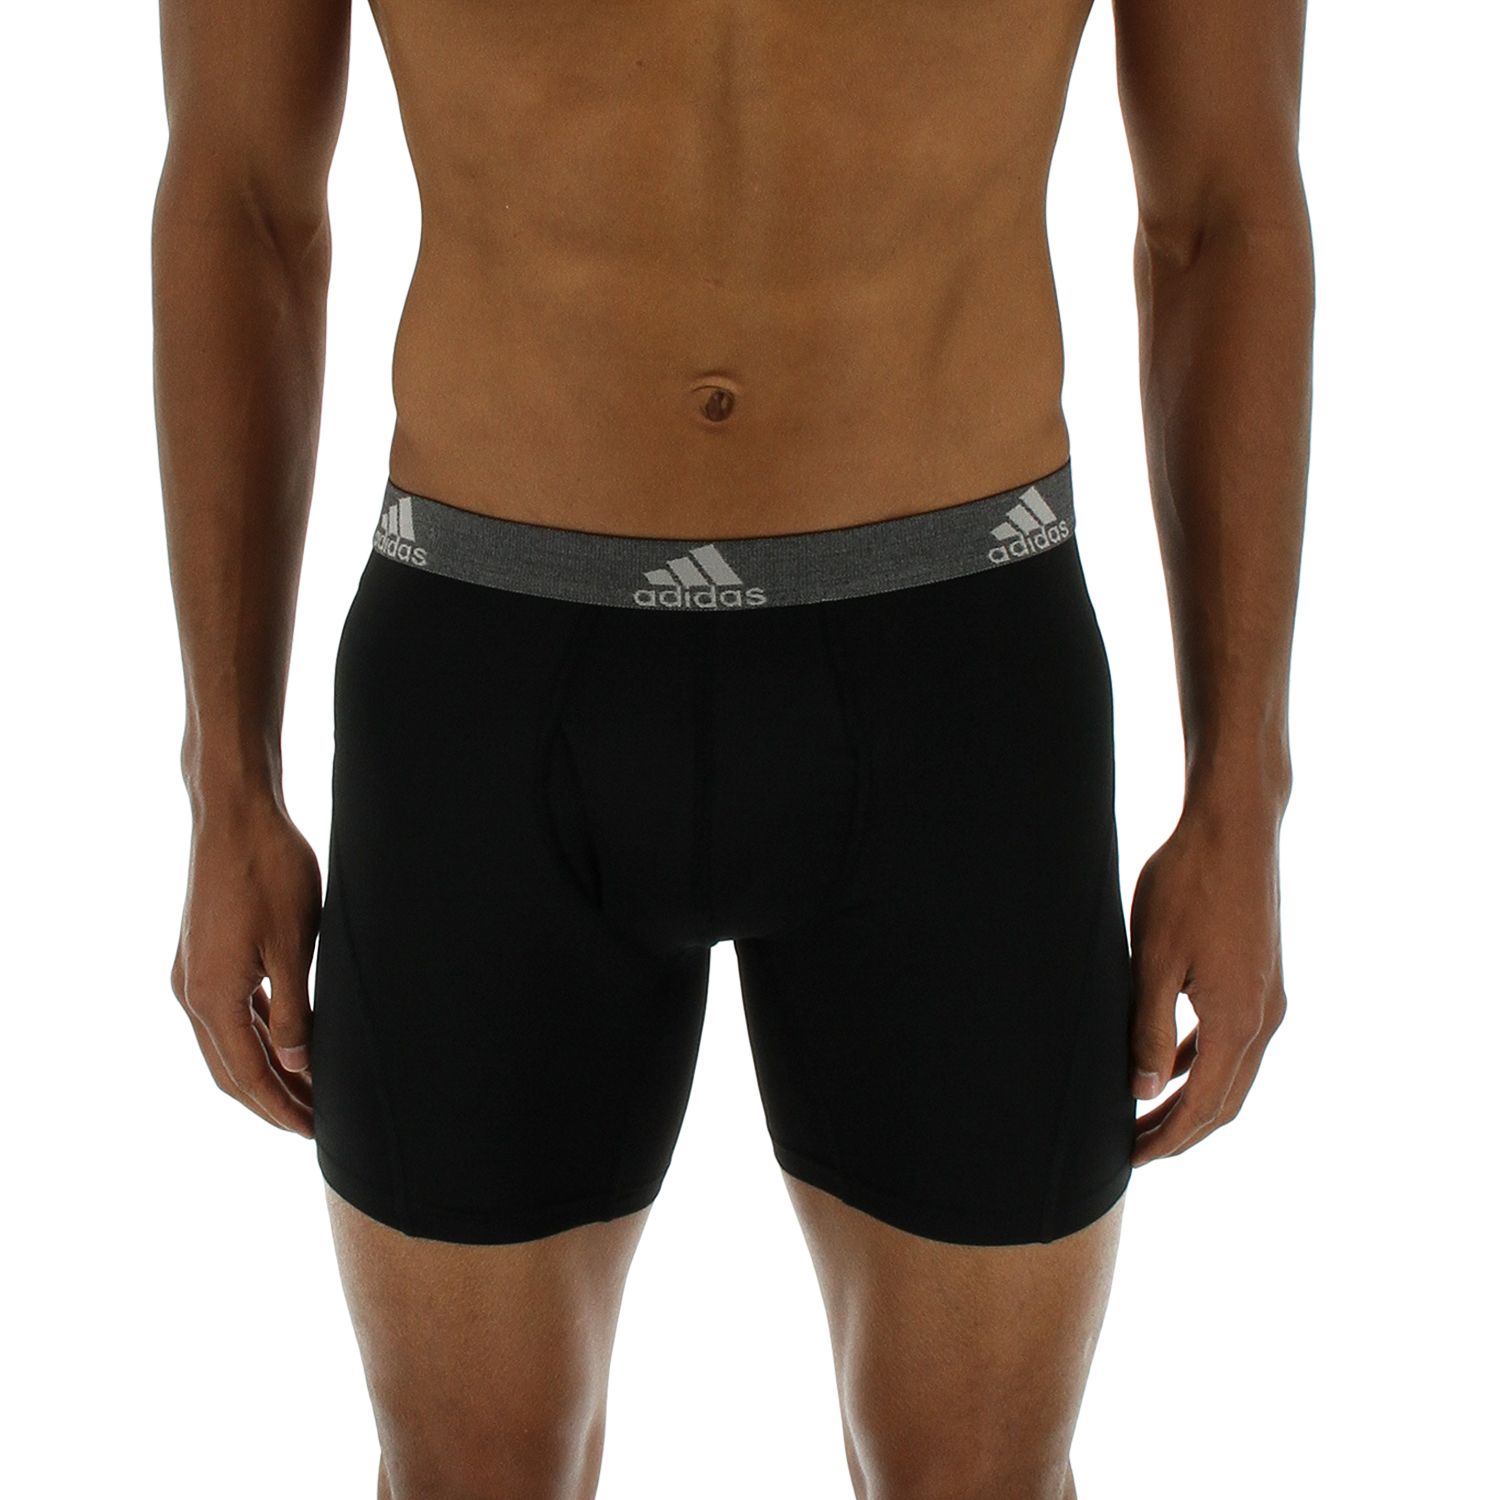 adidas relaxed performance boxer briefs 3 pack